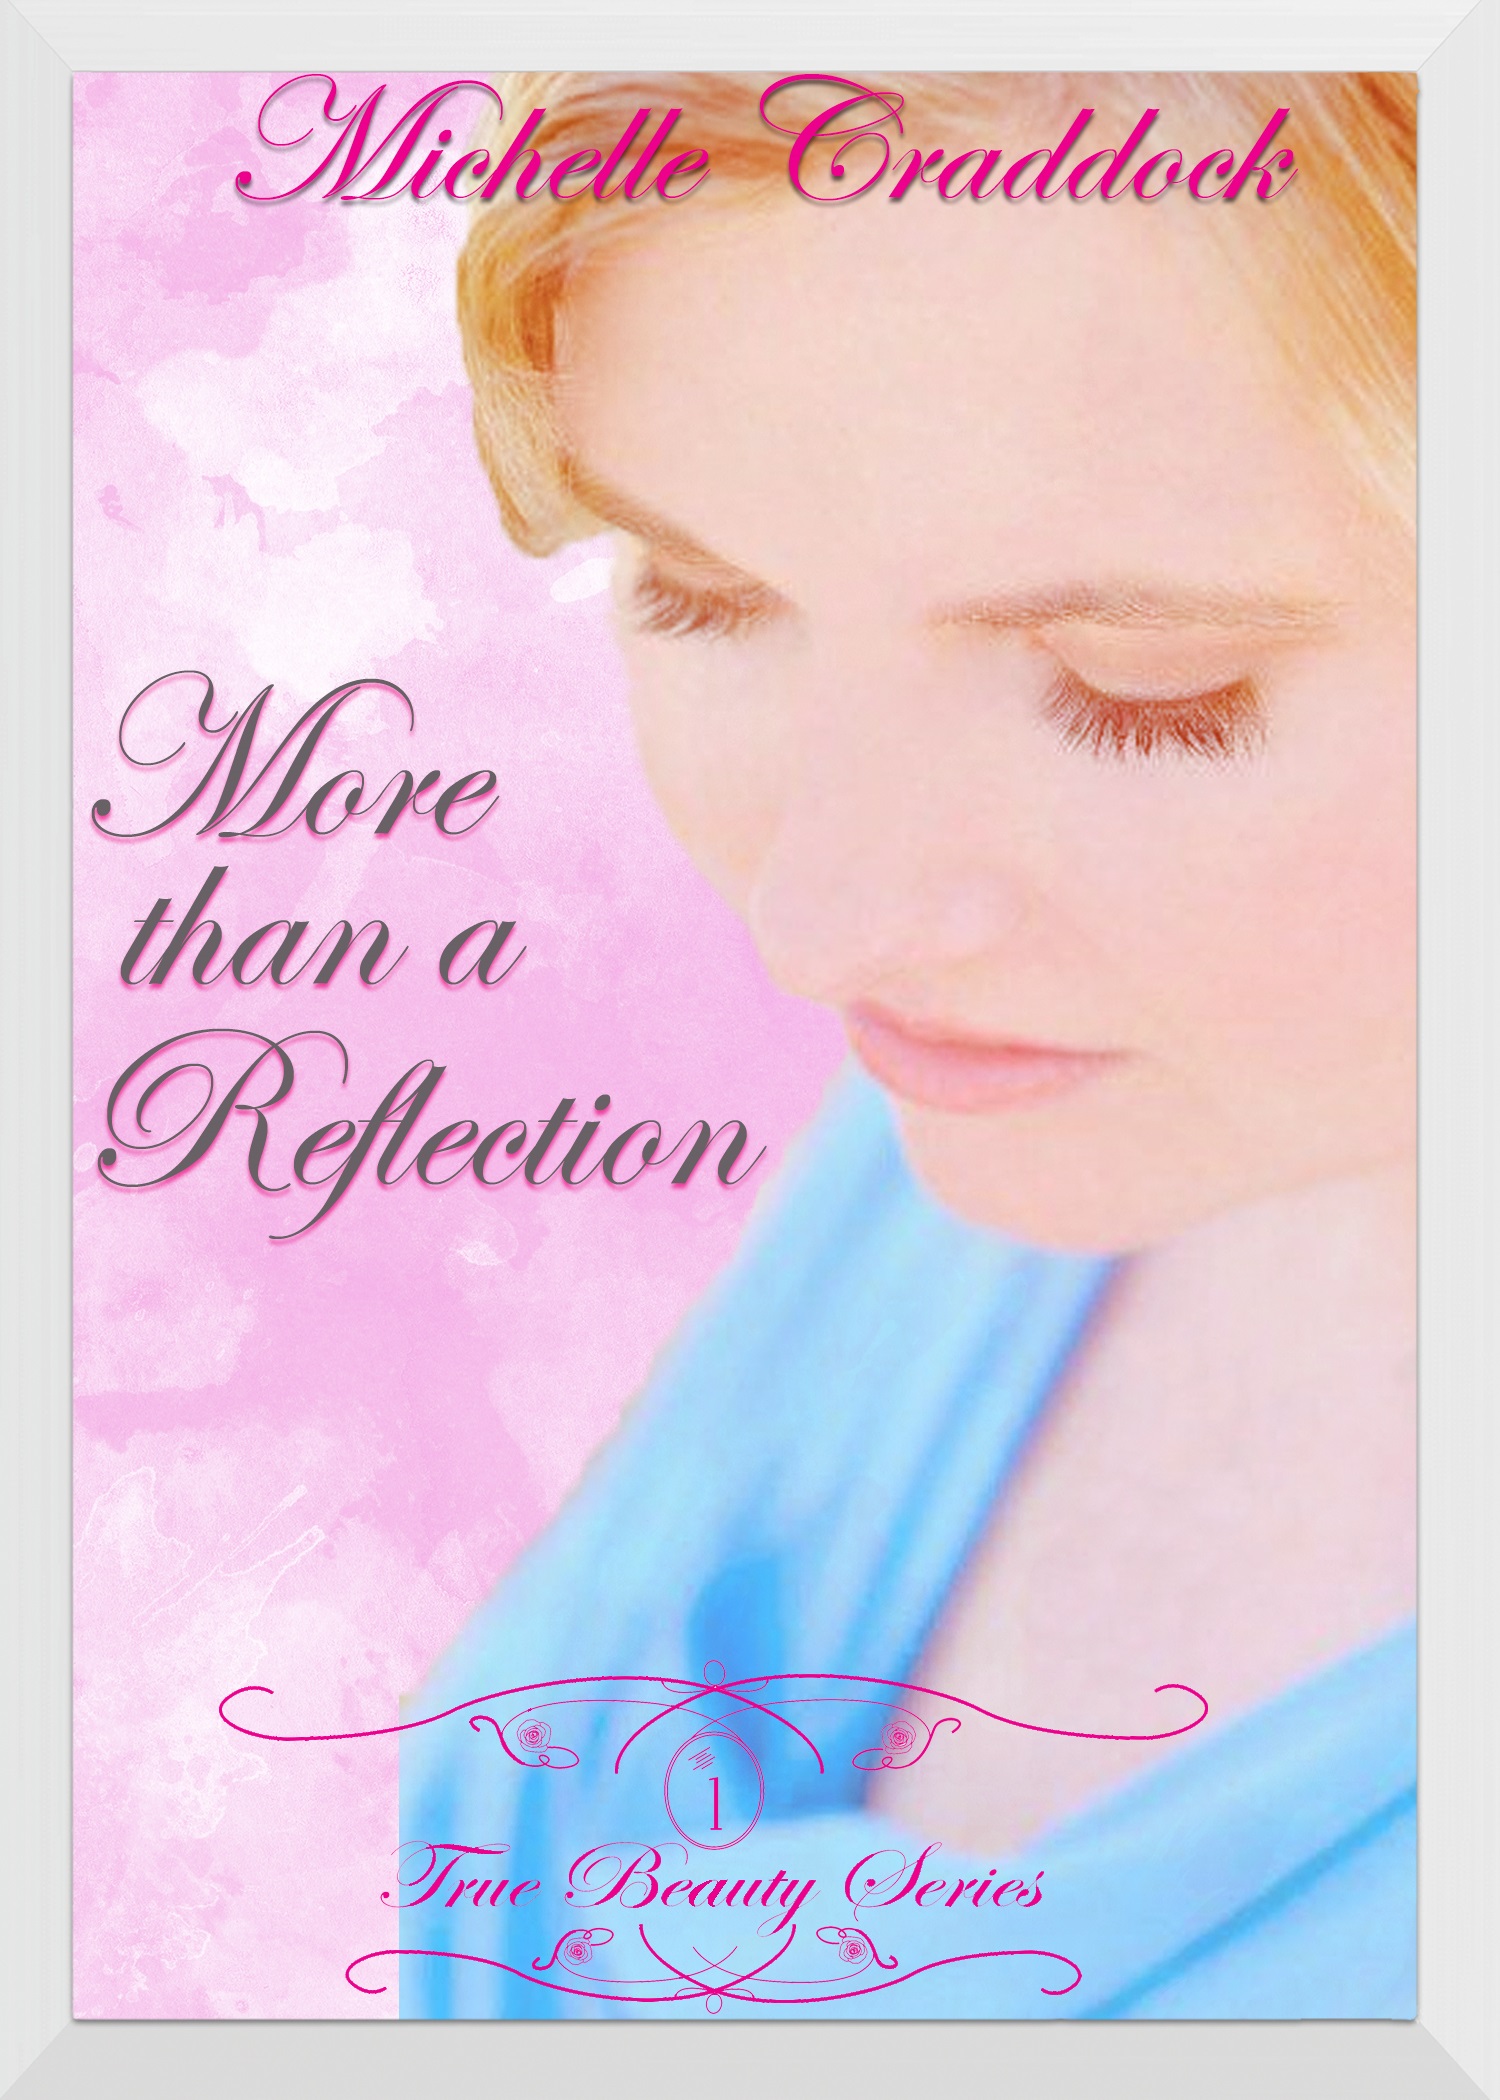 FREE: More than a Reflection by Michelle Craddock